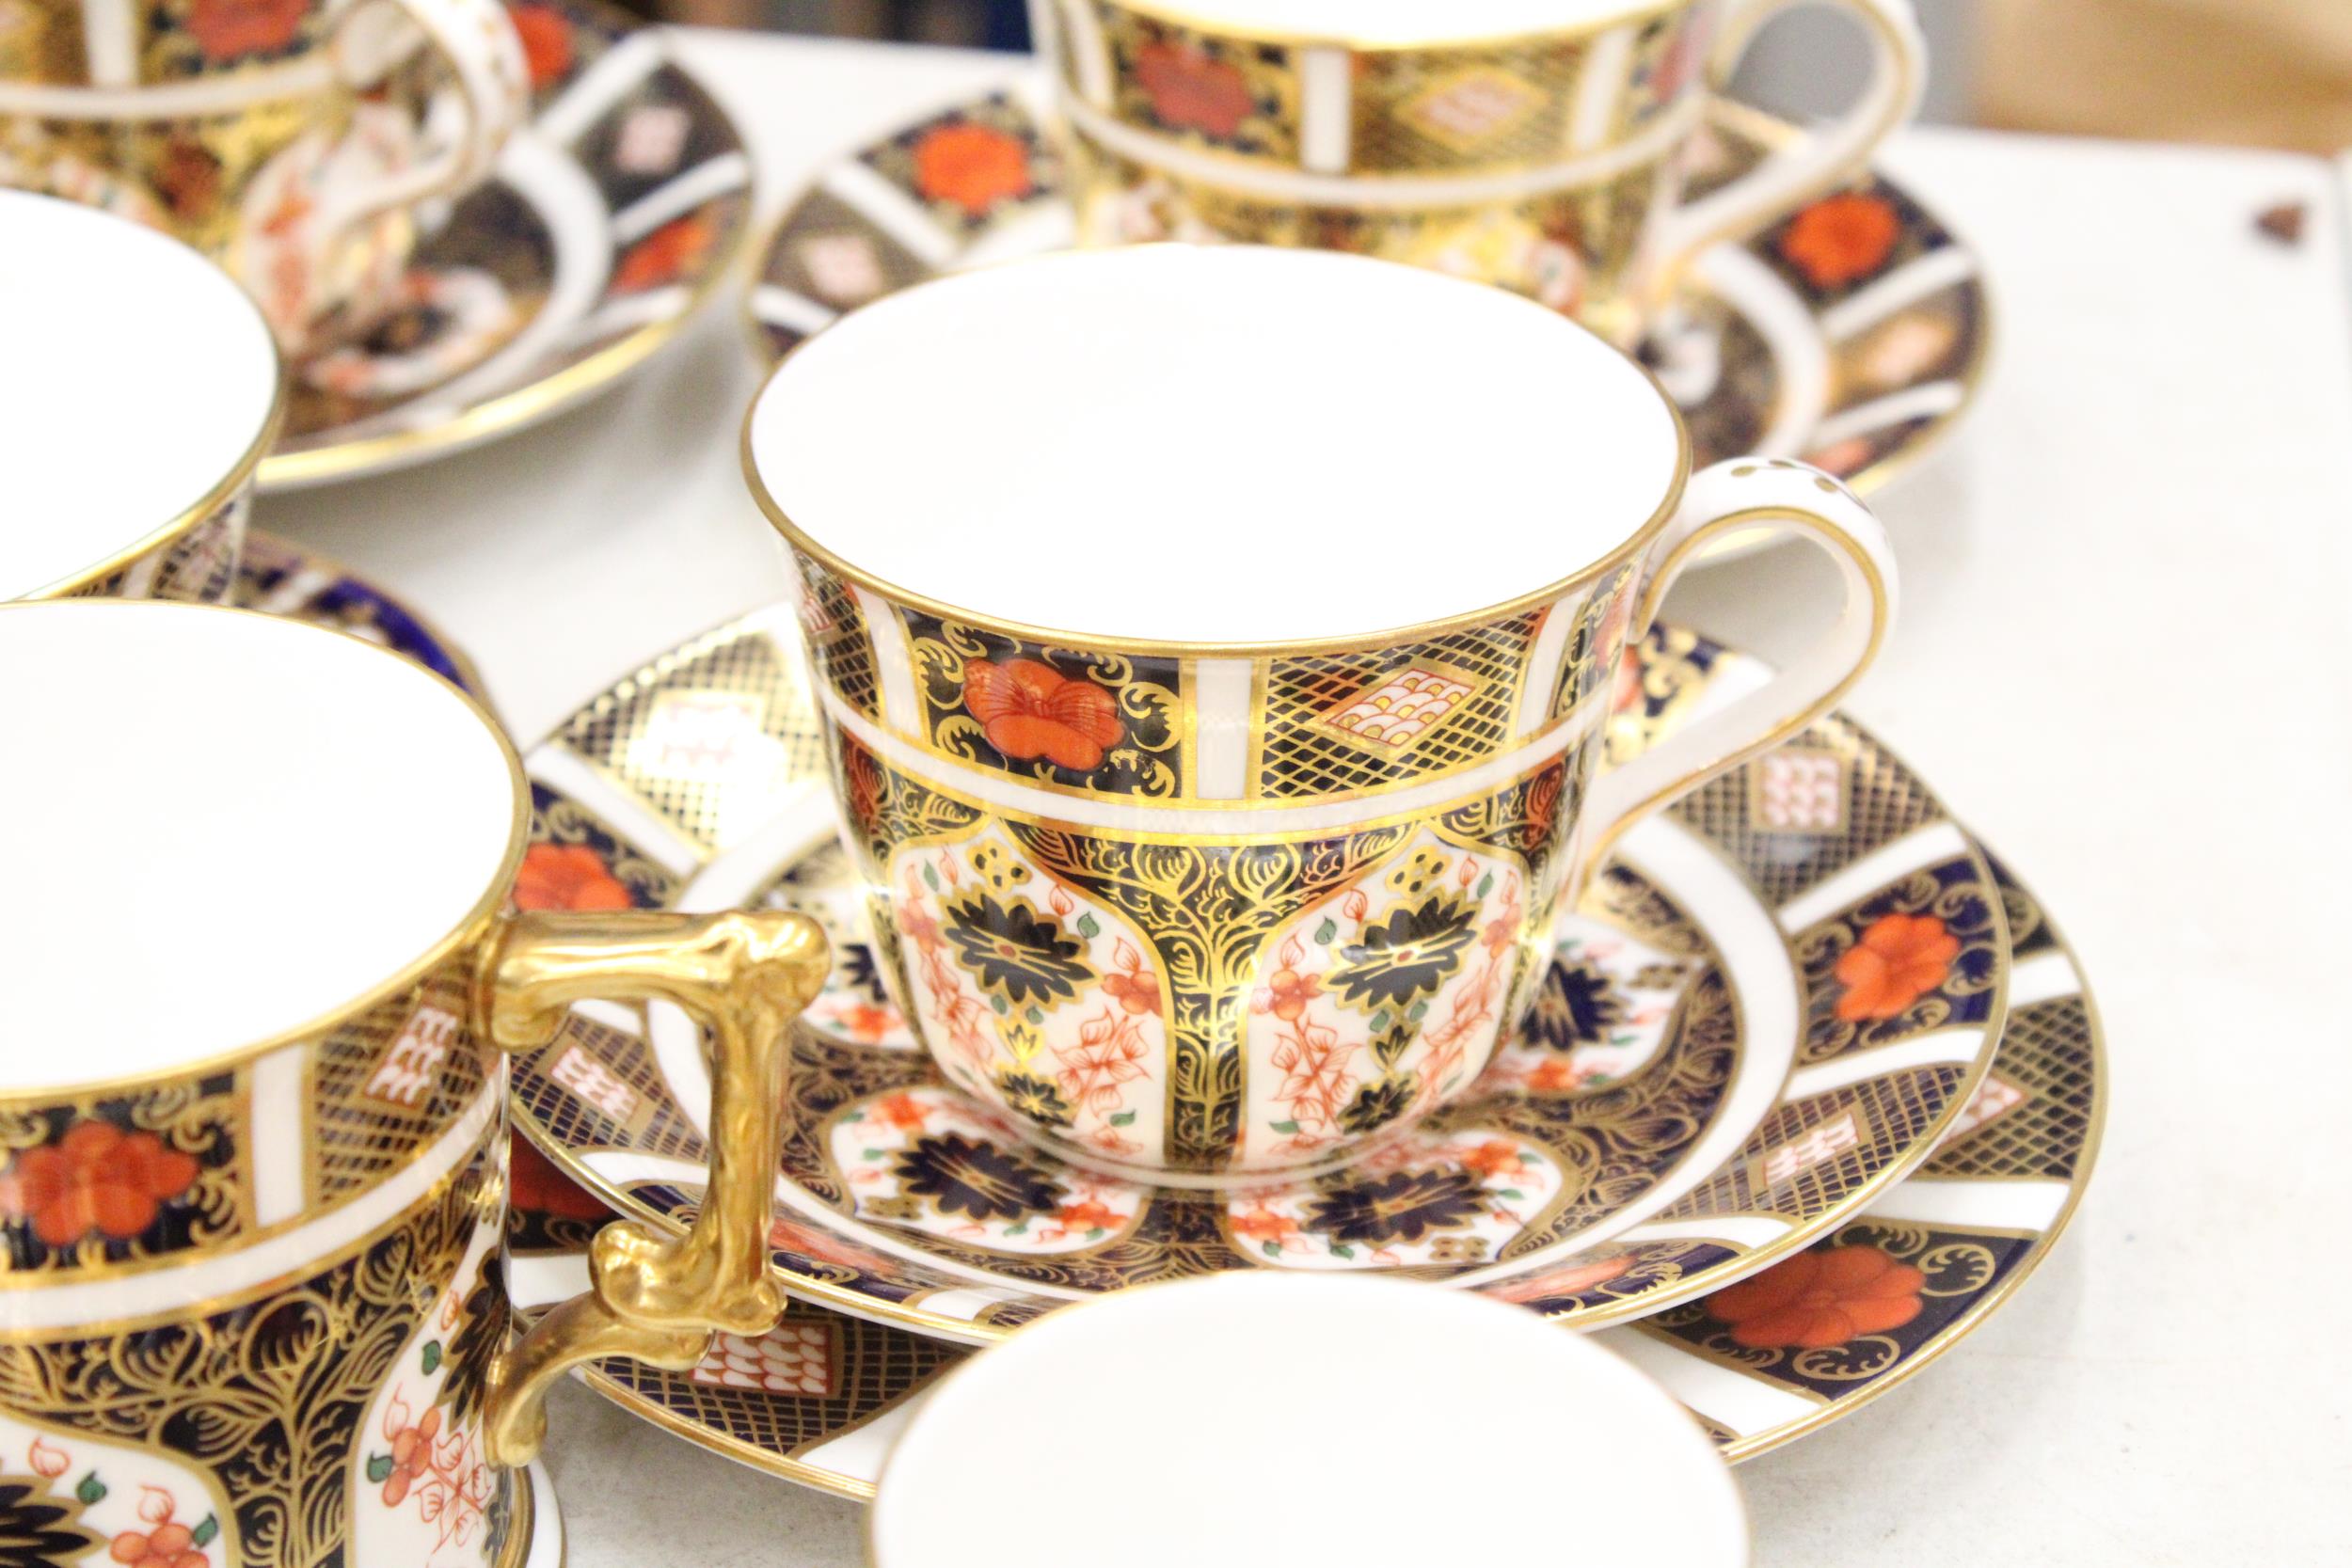 A QUANTITY OF ROYAL CROWN DERBY TO INCLUDE A LOVING CUP , COFFEE CANS AND SAUCERS, TEACUPS AND - Image 7 of 7